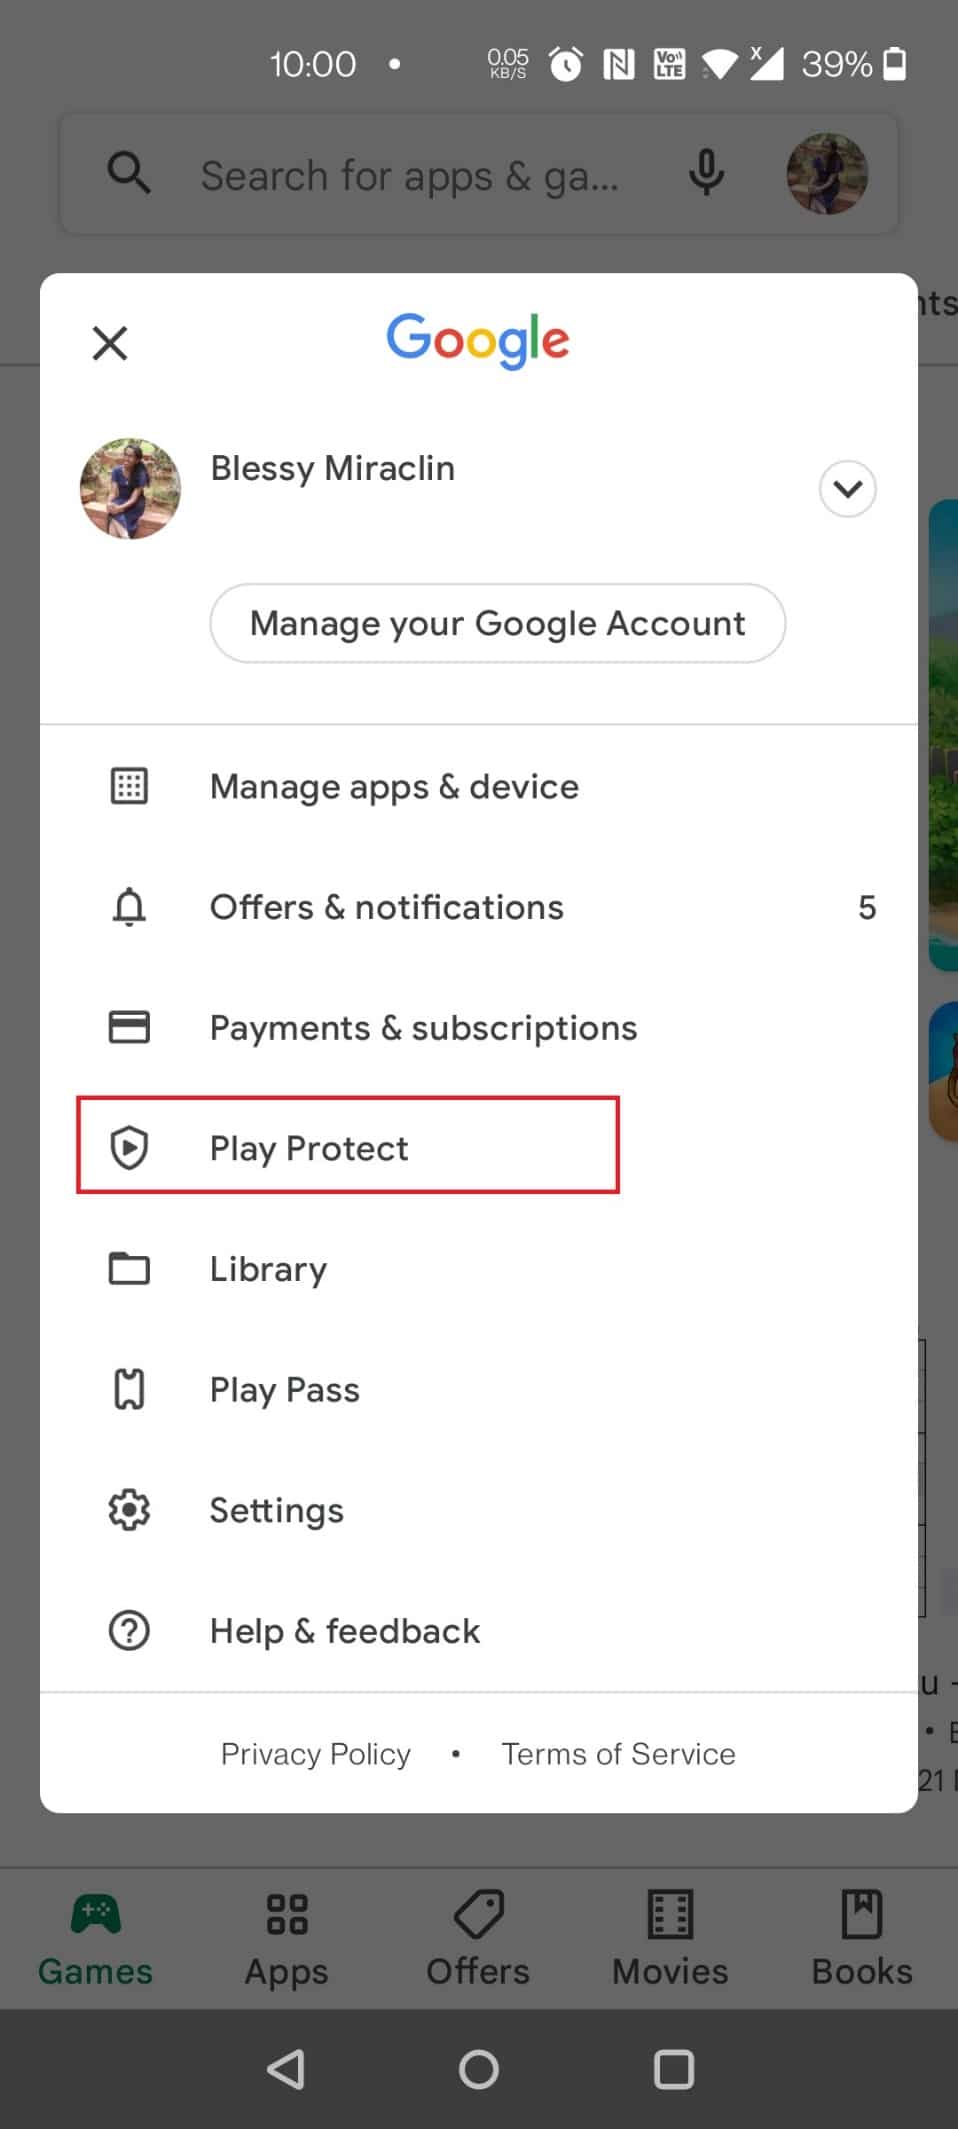 tap on Play Protect